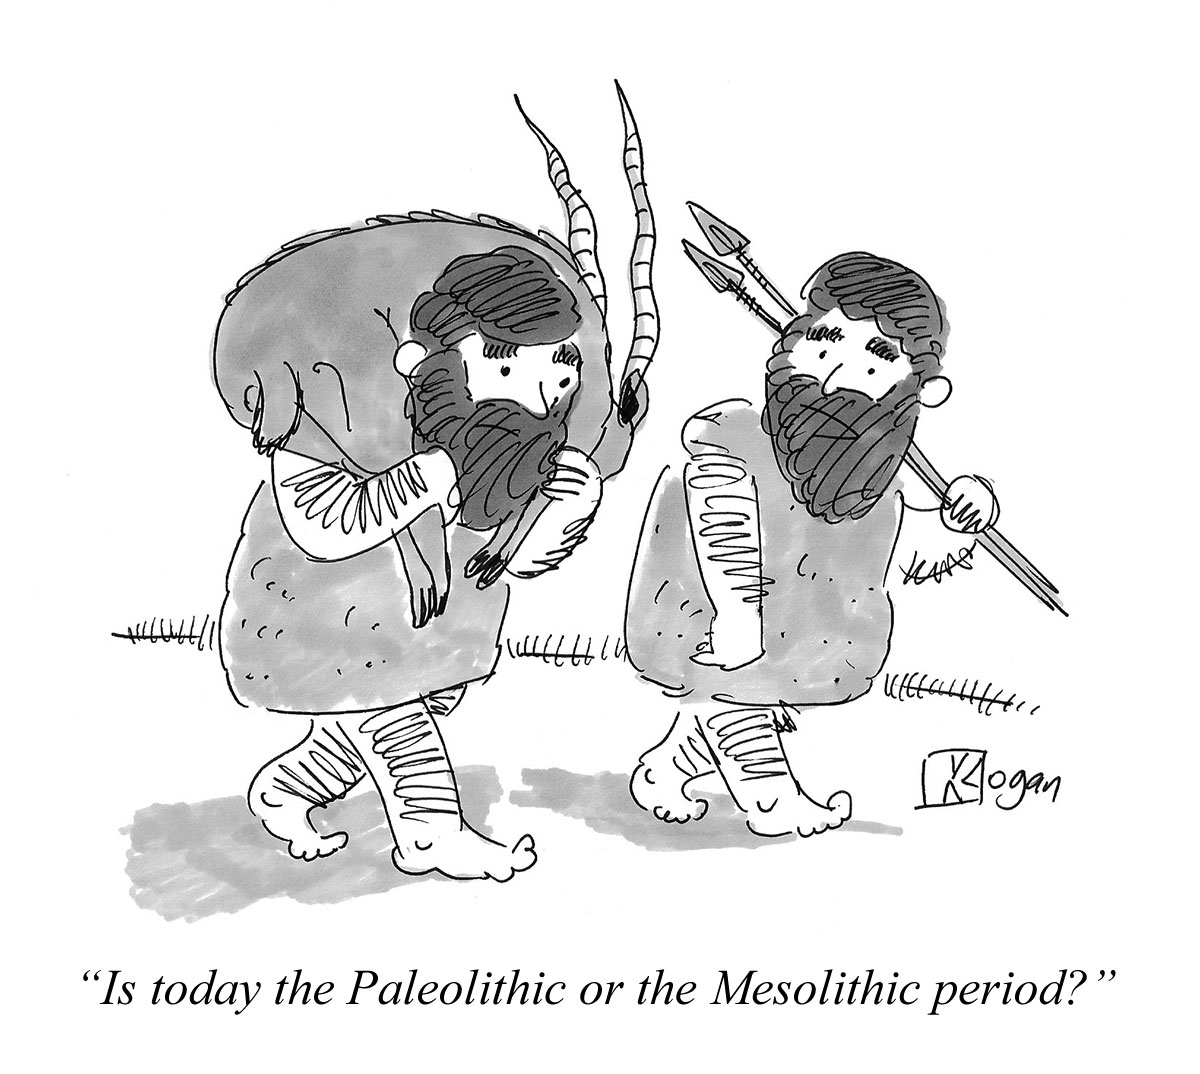 Is today the Paleolithic or the Mesolithic period?